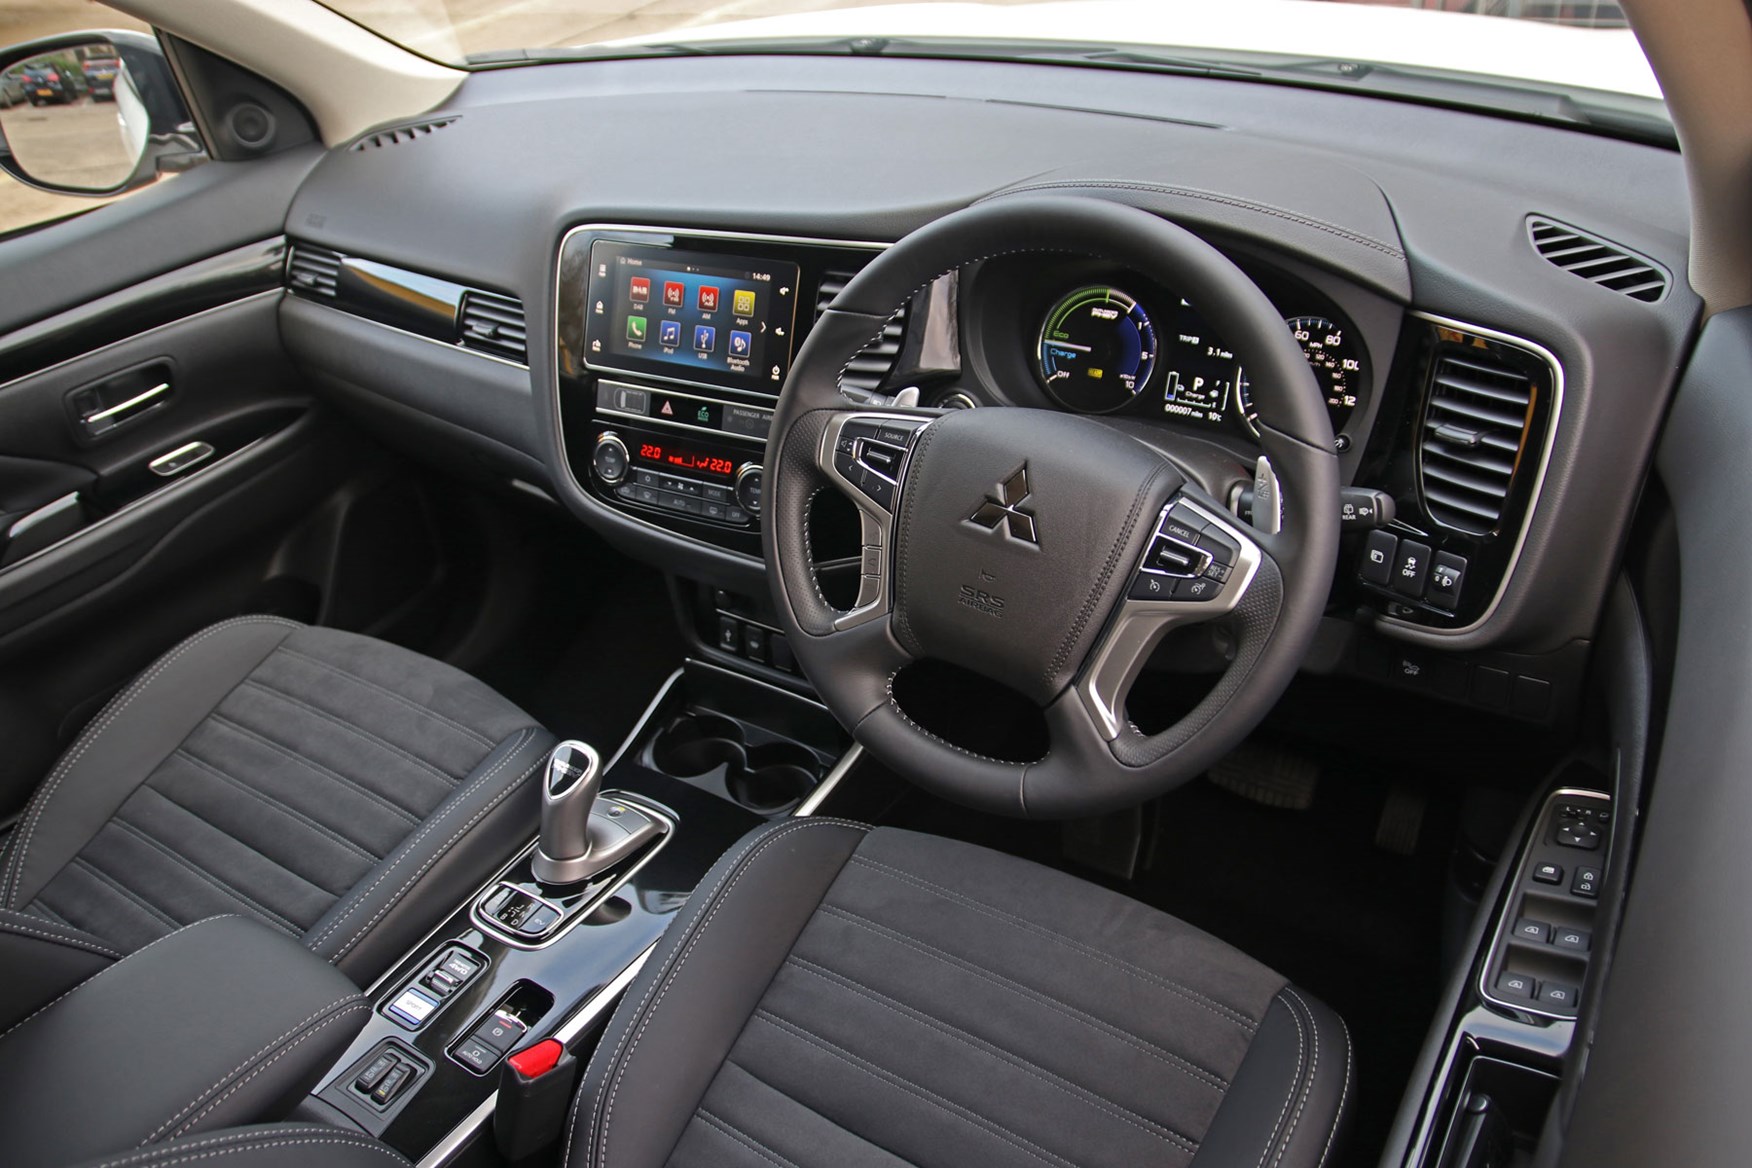 Mitsubishi Outlander Commercial 4x4 van review - cab interior, dashboard, steering, infotainnment system